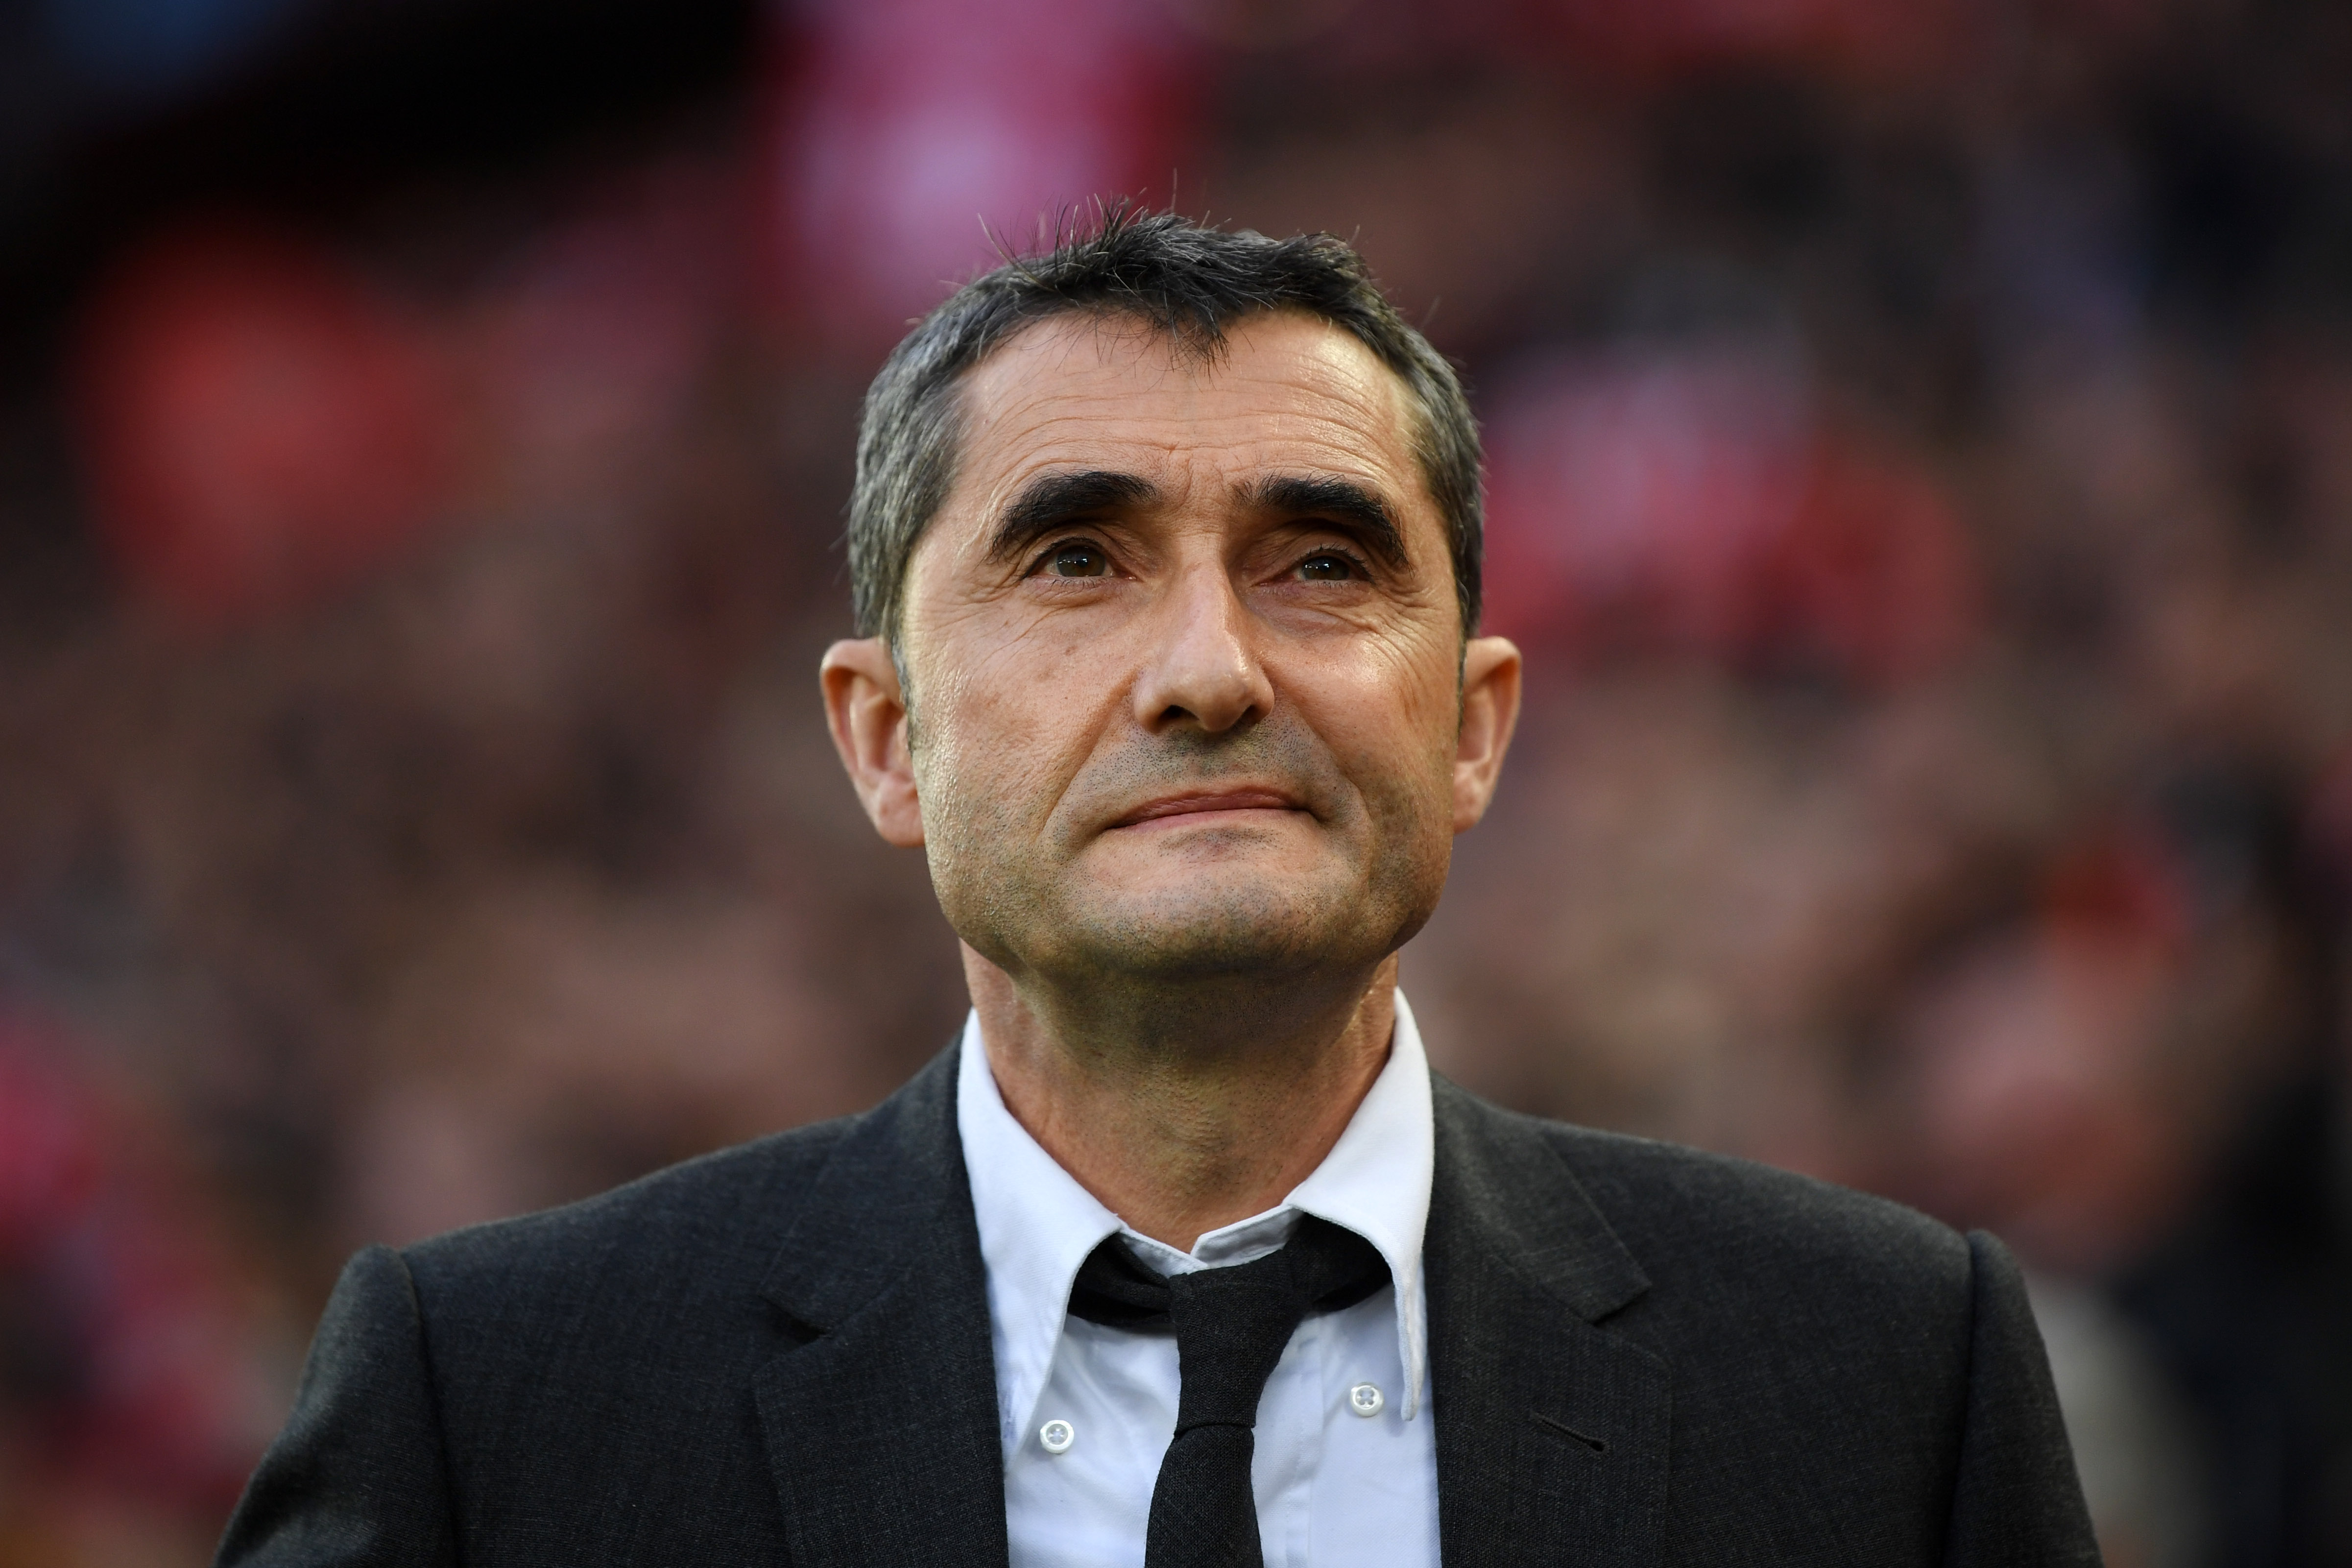 LIVERPOOL, ENGLAND - MAY 07:  Ernesto Valverde, Manager of Barcelona looks on prior to the UEFA Champions League Semi Final second leg match between Liverpool and Barcelona at Anfield on May 07, 2019 in Liverpool, England. (Photo by Shaun Botterill/Getty Images)